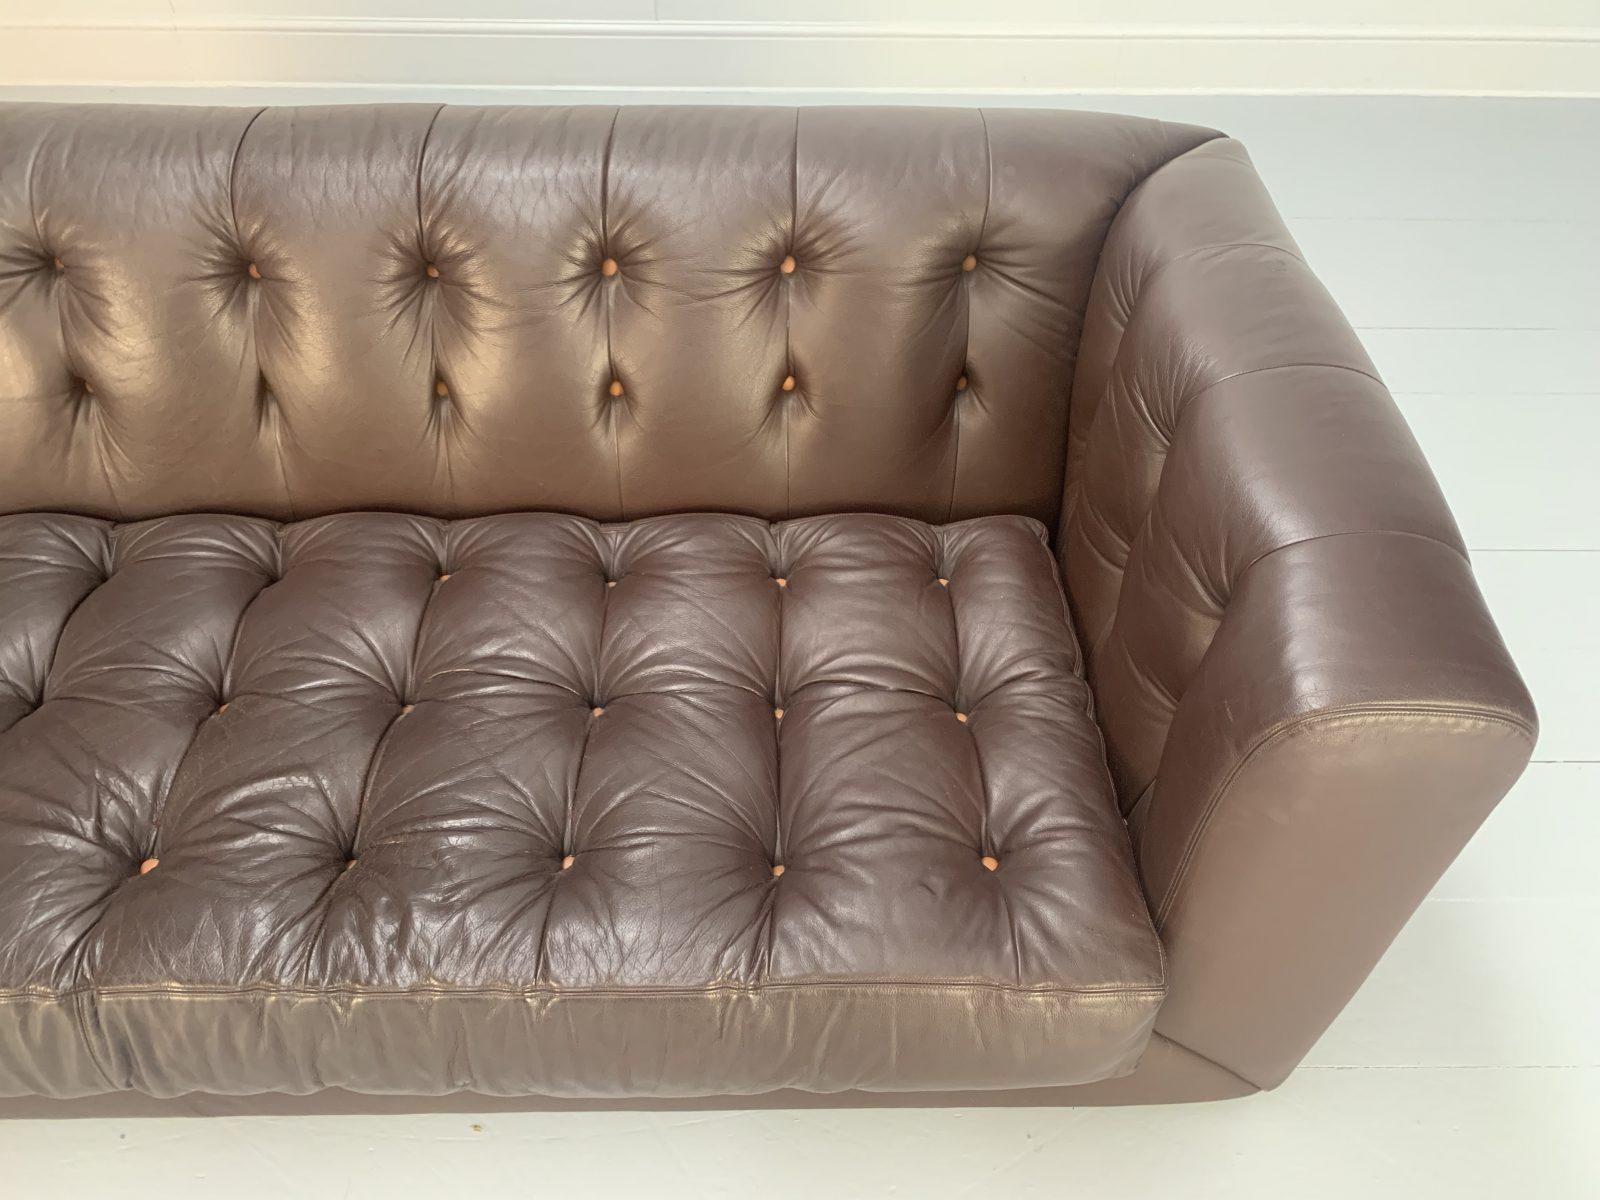 David Linley “Yoxford” Chesterfield 3-Seat Sofa in Brown Leather For Sale 7